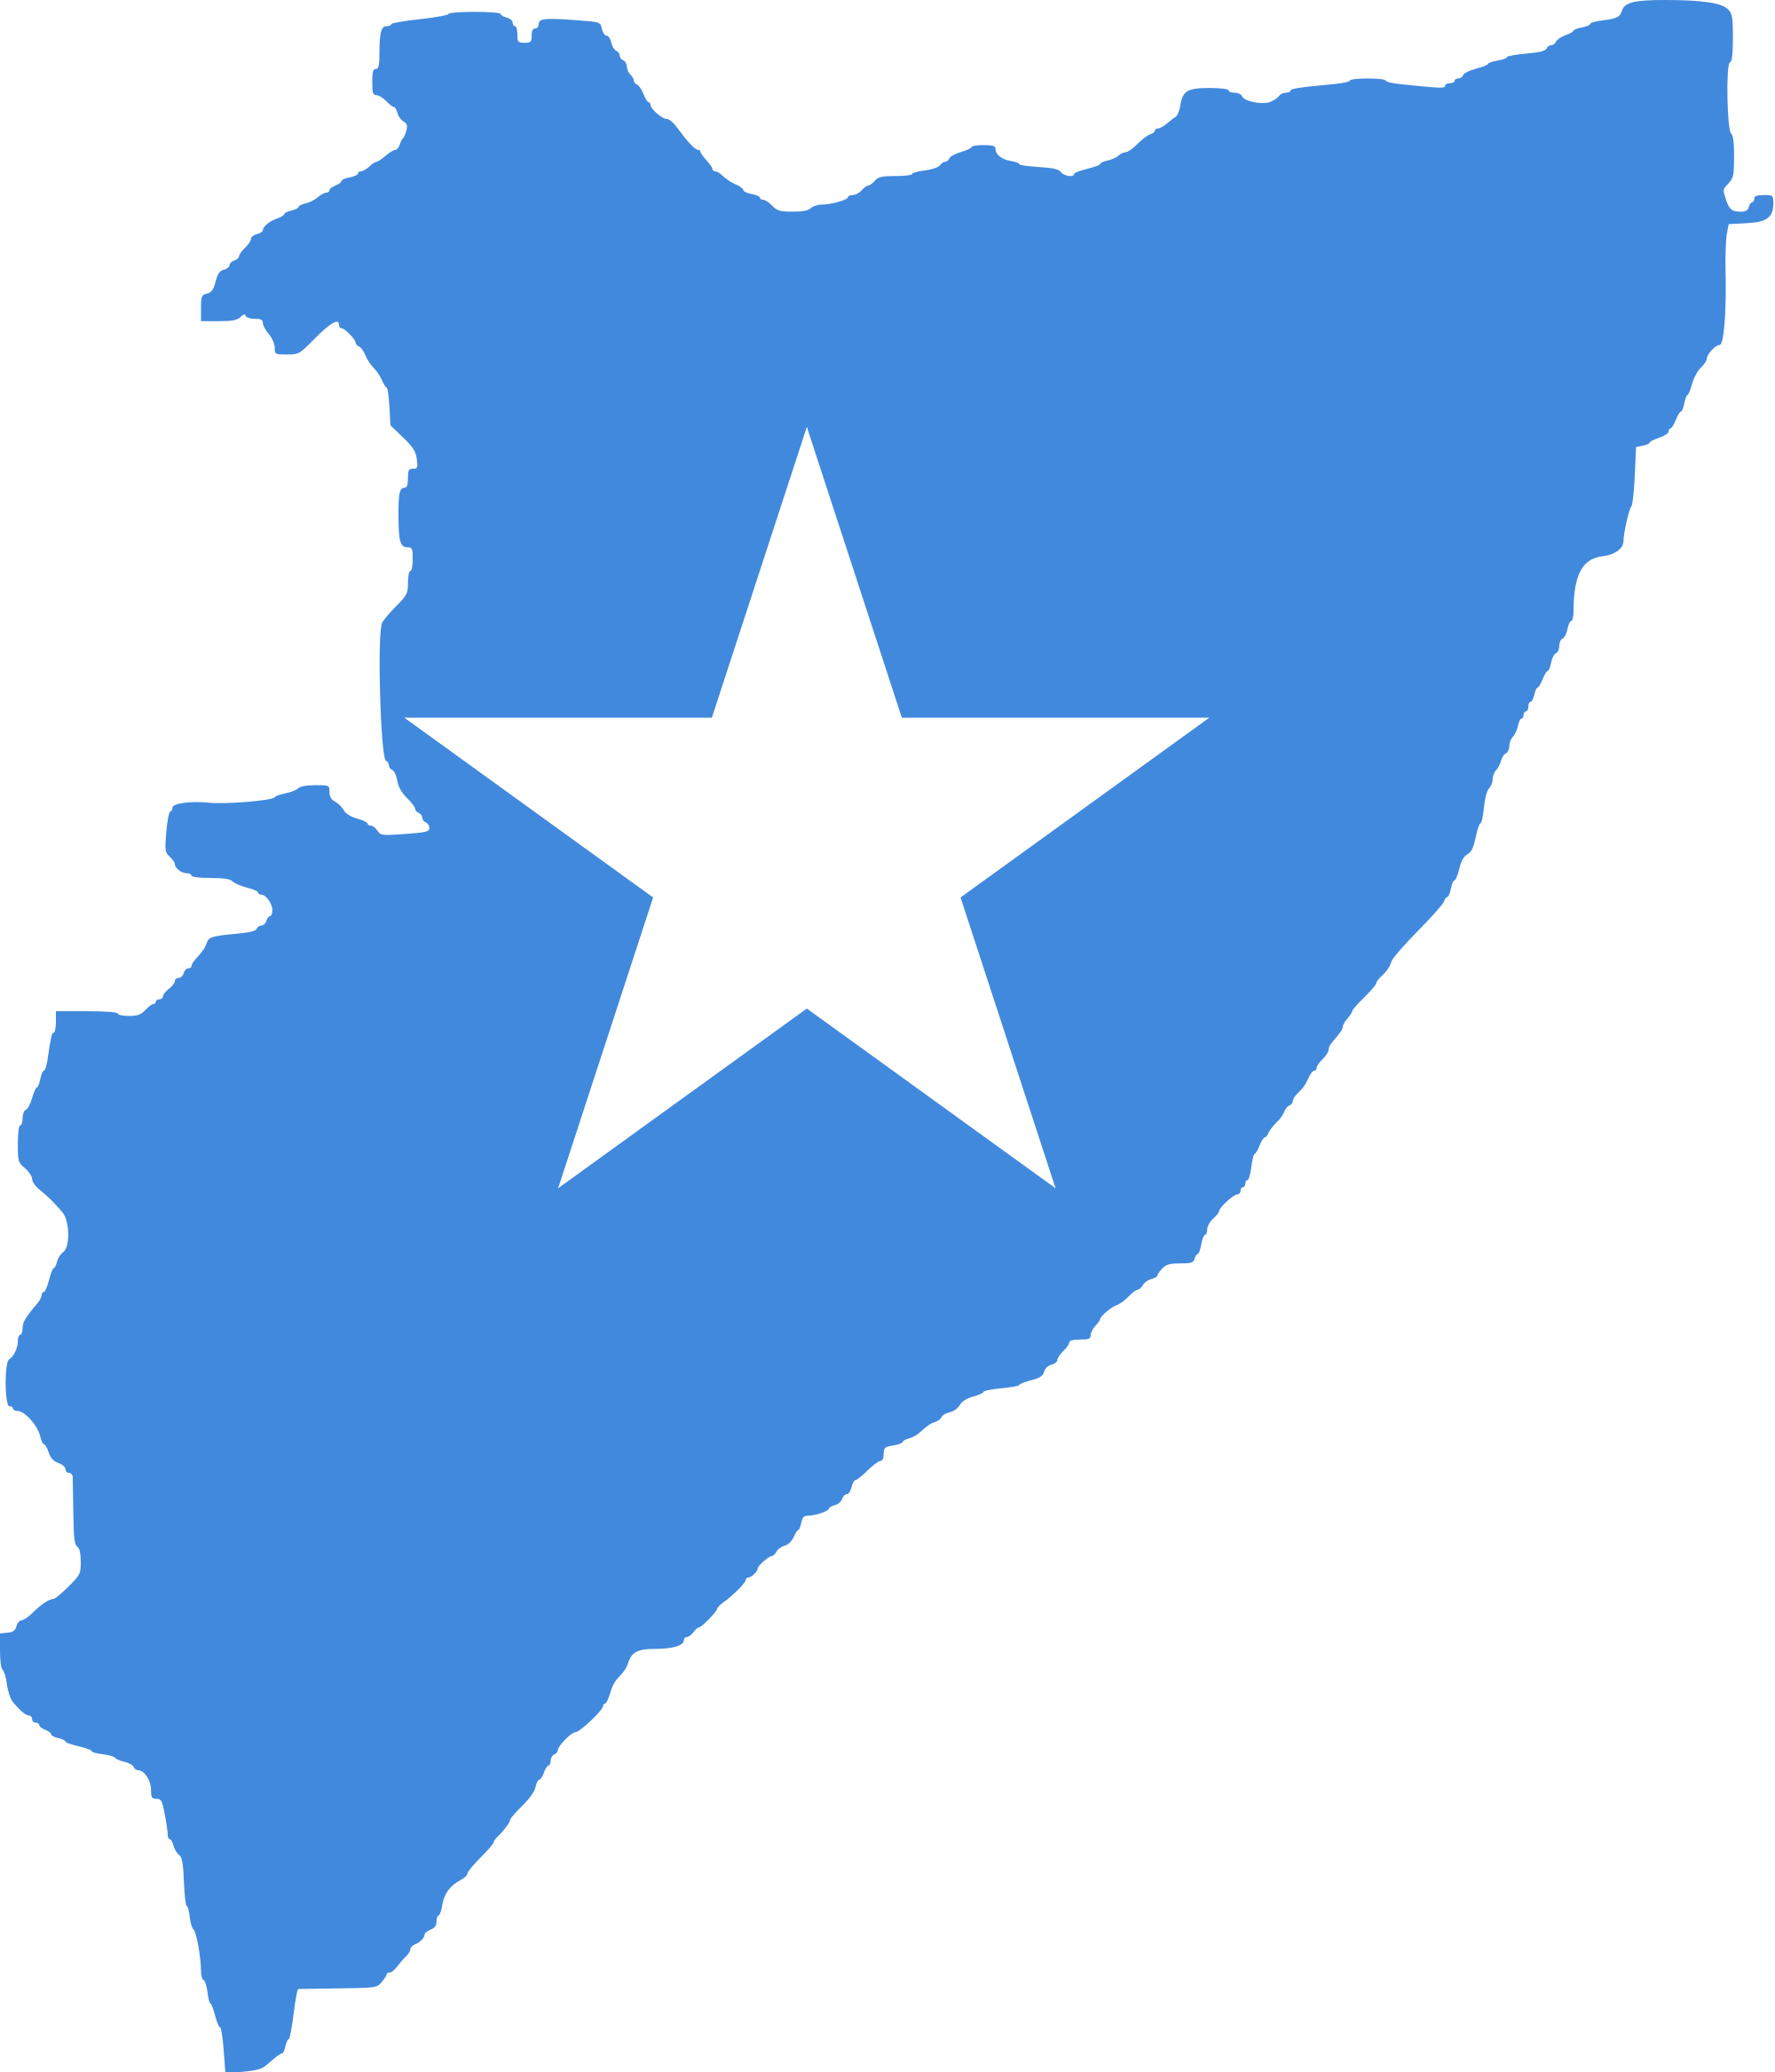 2000px-Flag-map_of_Greater_Somalia.svg.png